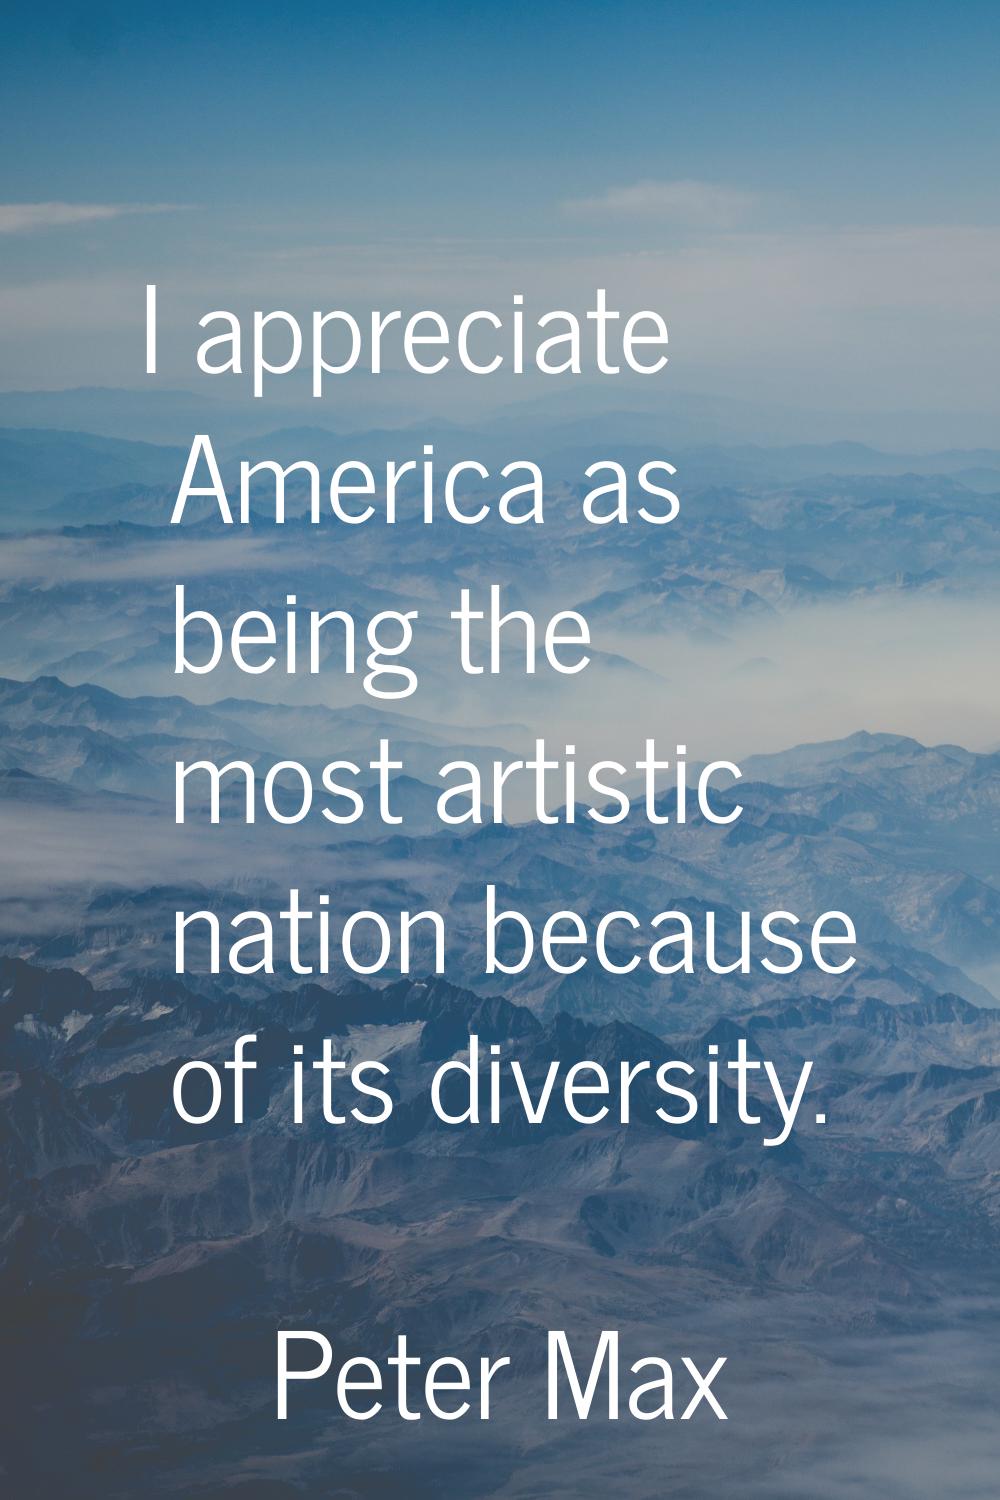 I appreciate America as being the most artistic nation because of its diversity.